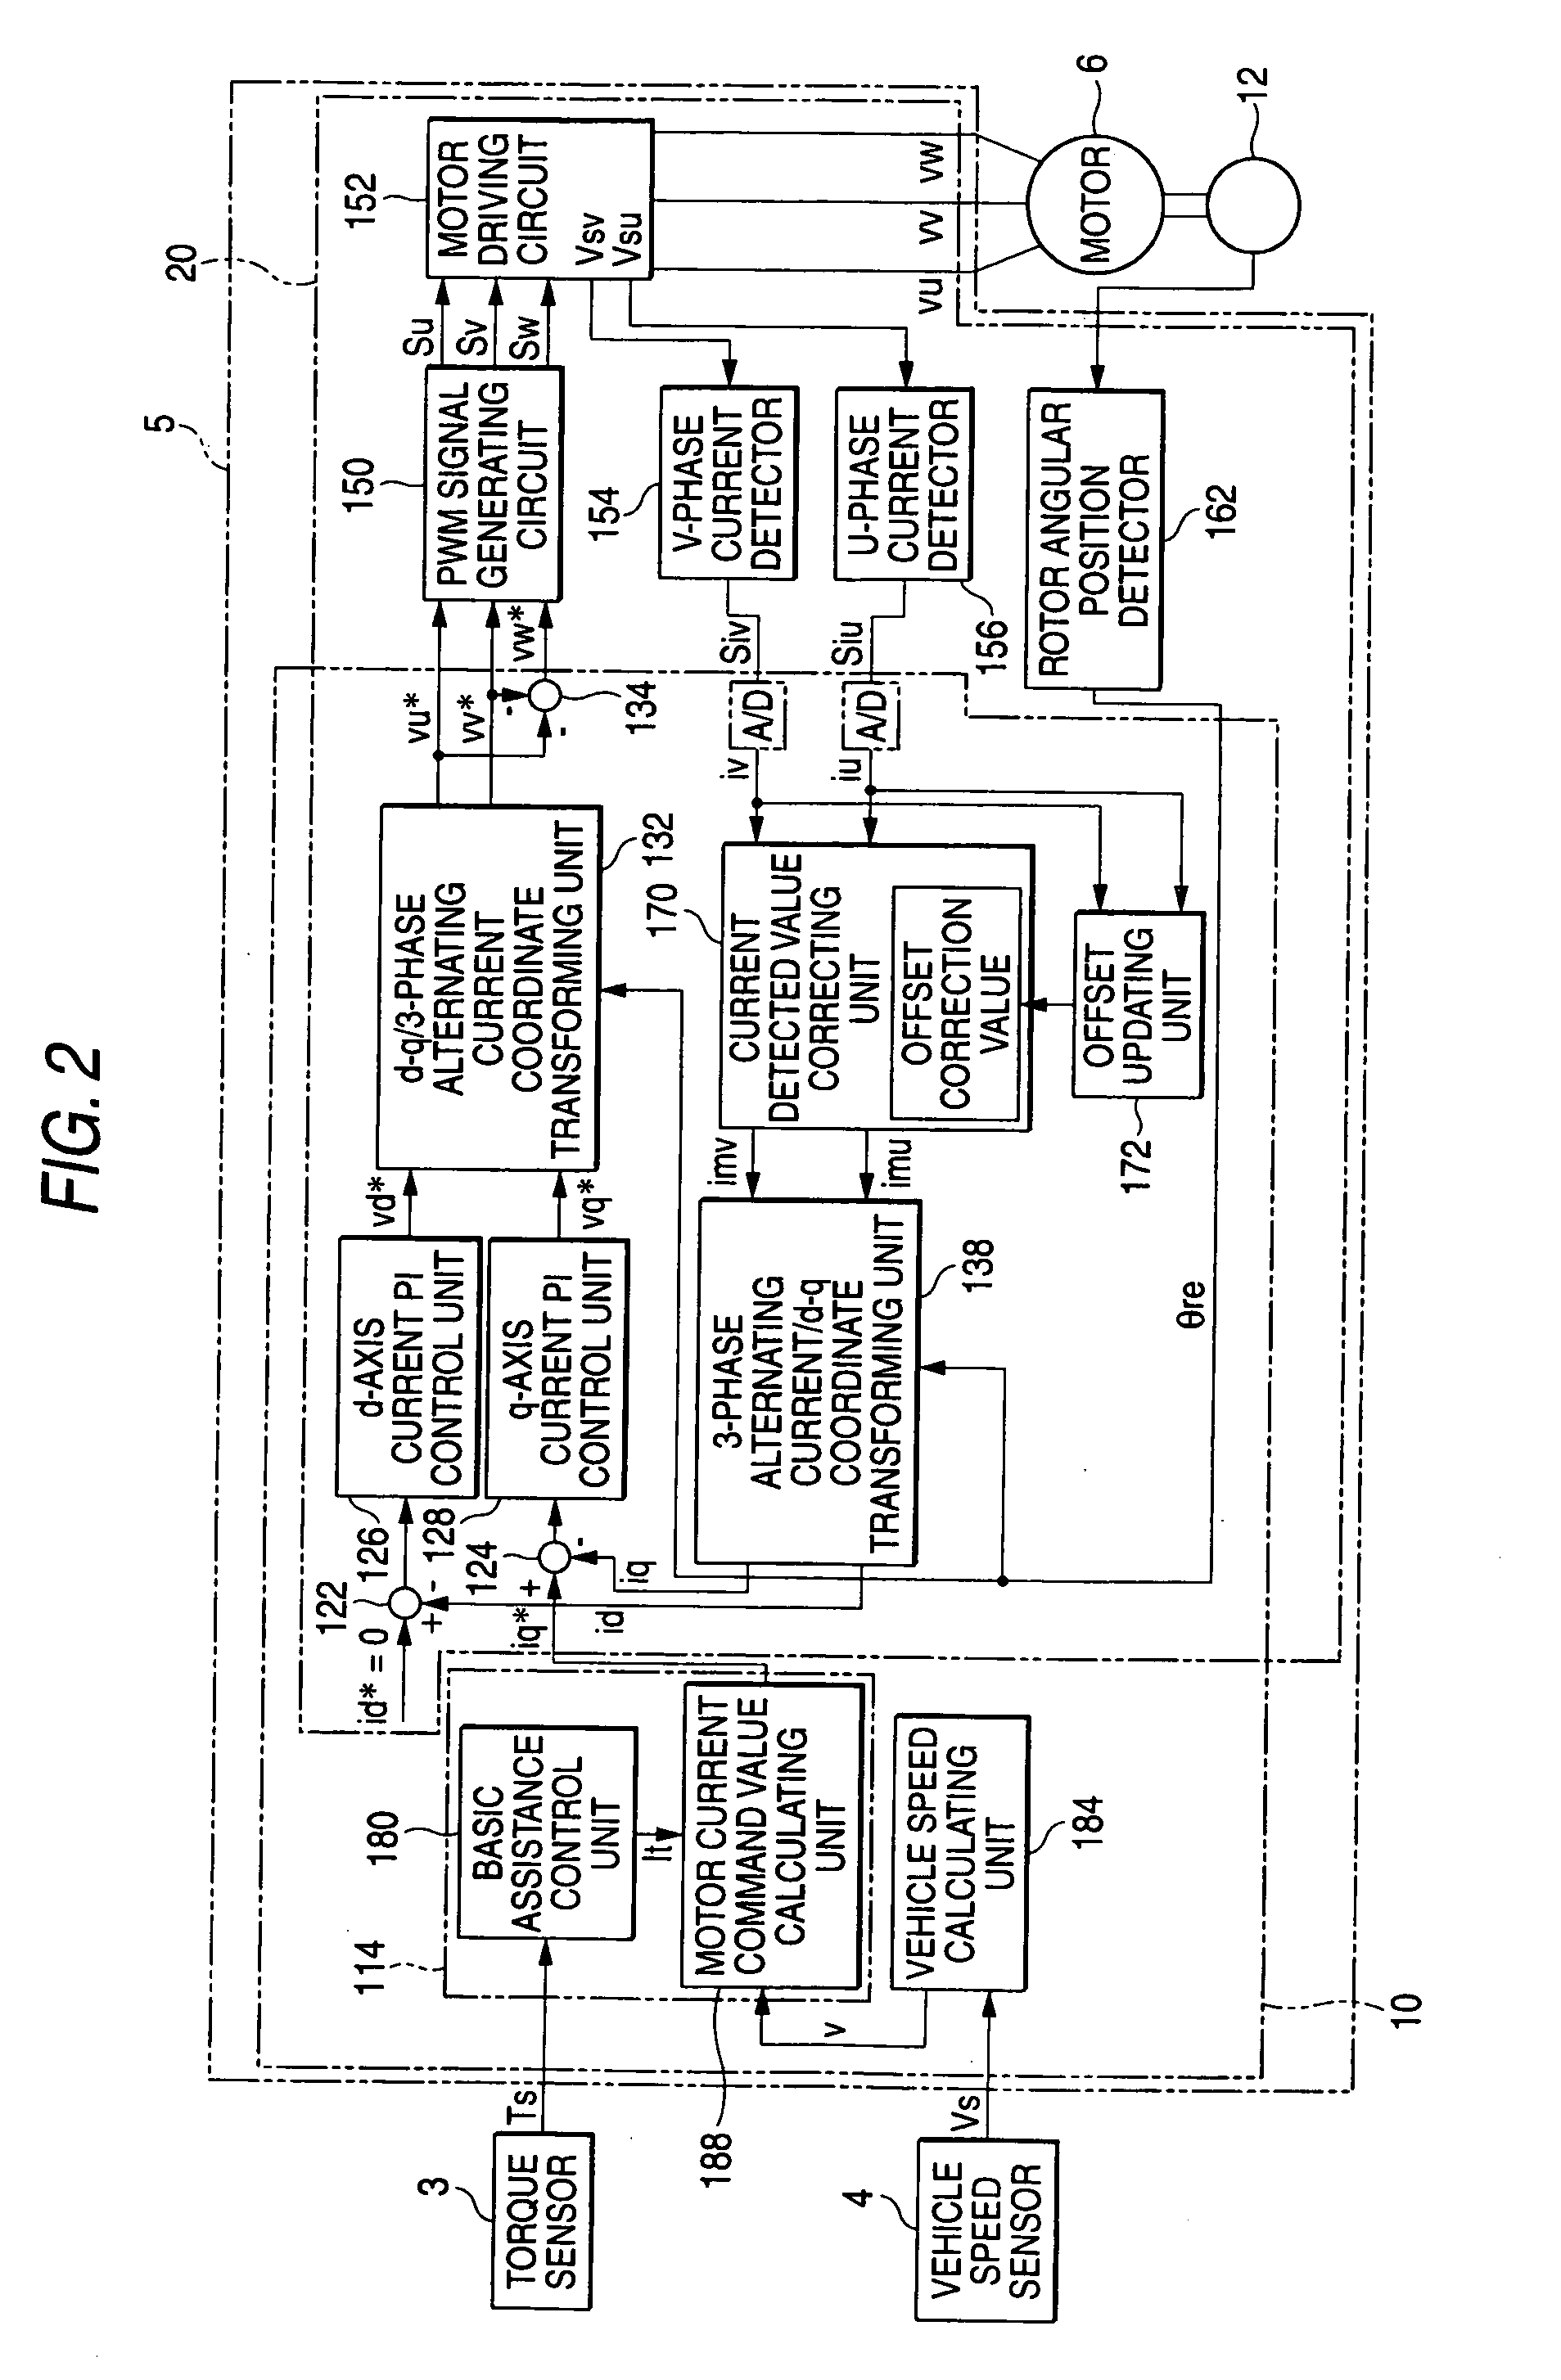 Power-assisted steering system